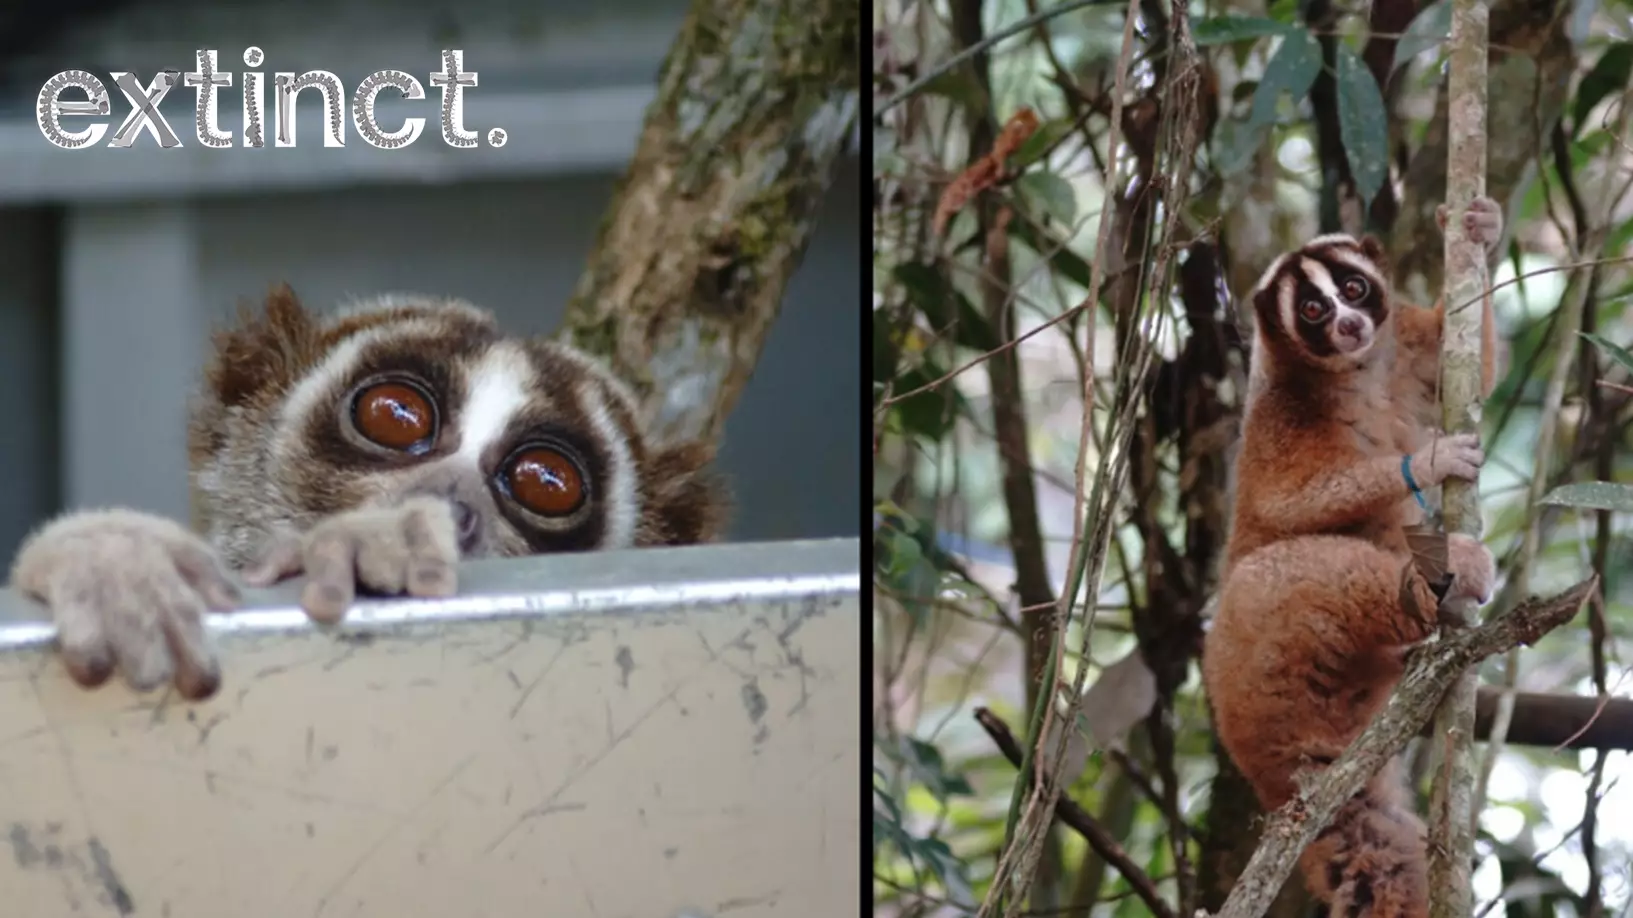 Amazing Moment 20 Slow Lorises Are Released Into The Wild For The First Time